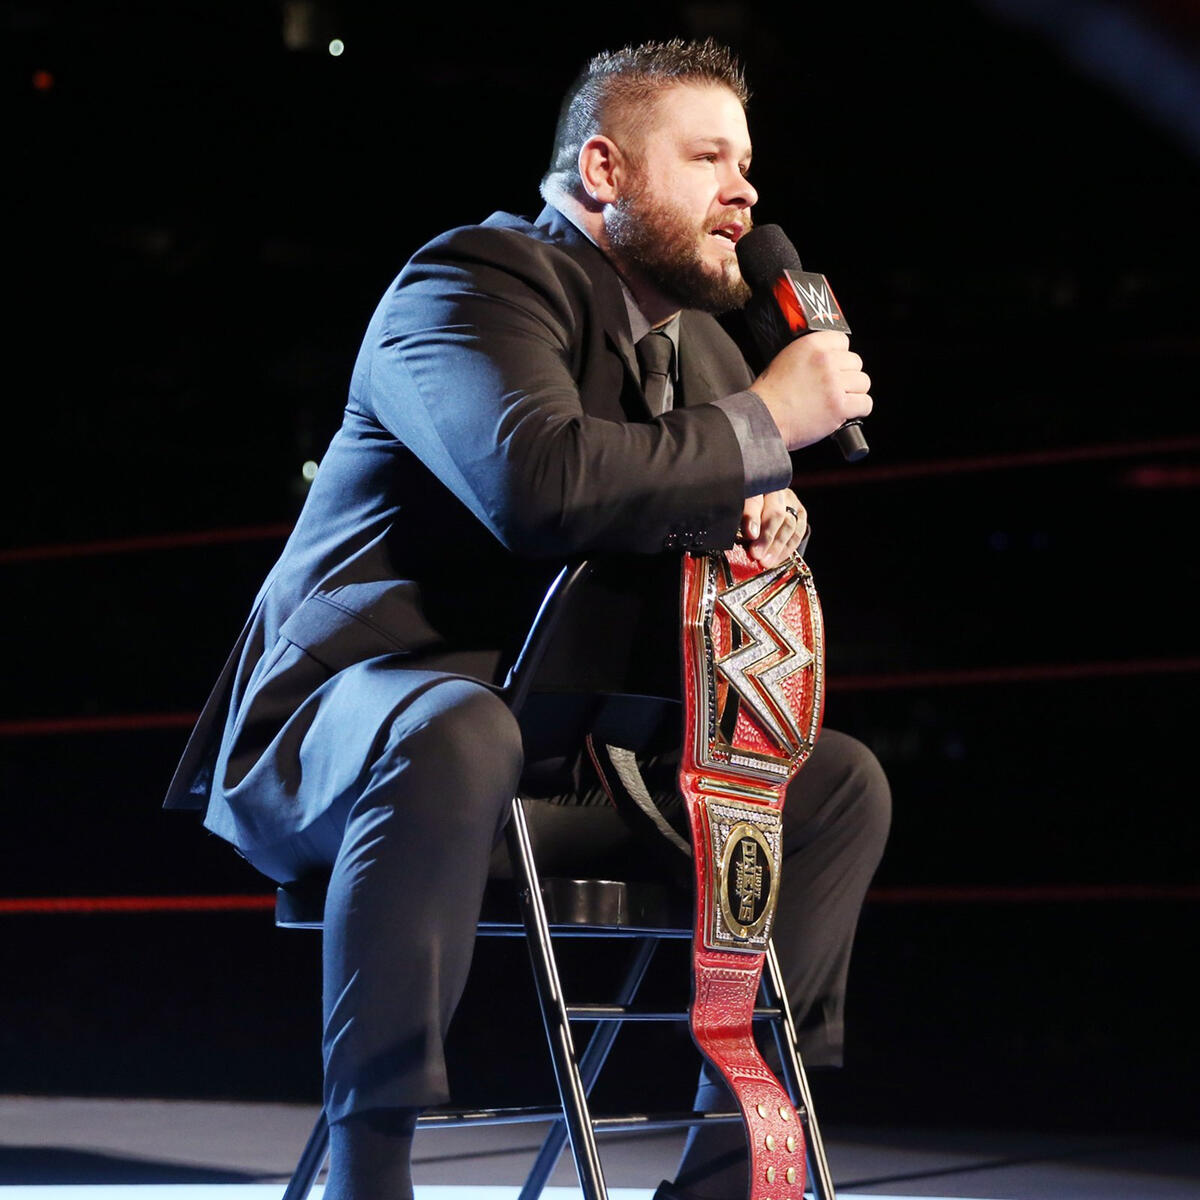 Unlike Brock Lesnar, Owens says he will not take Goldberg lightly, claiming he knows what to expect and what to do.